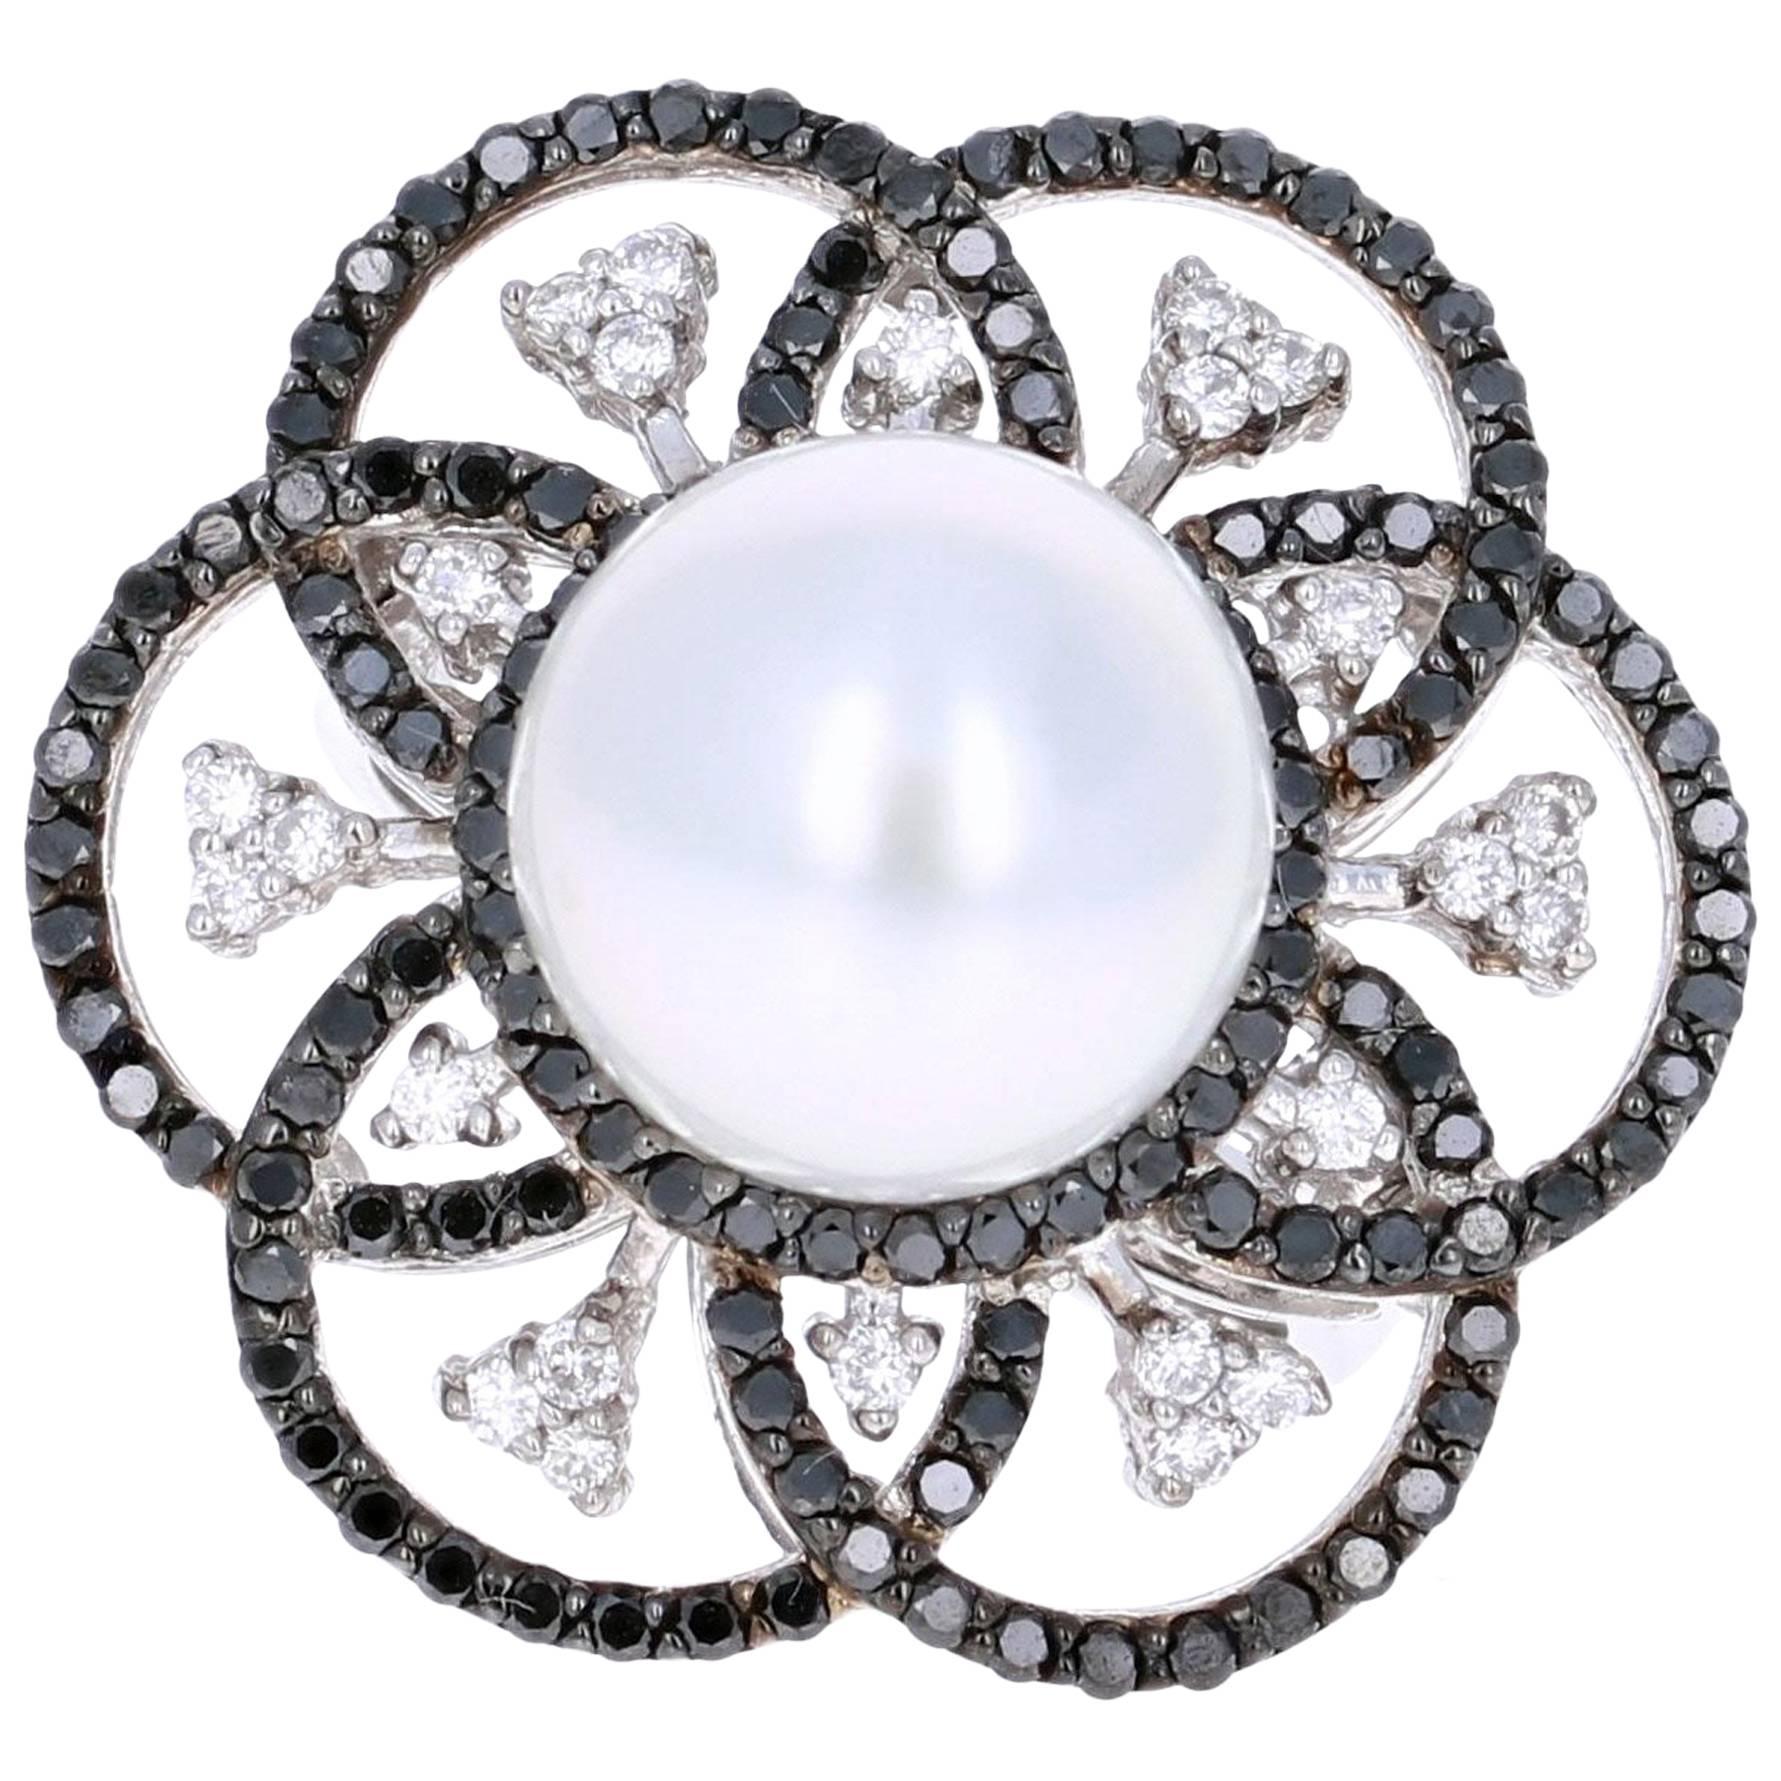 A Gorgeous 1.31 carat South Sea Pearl, Black and White Diamond Cocktail ring that is sure to elevate your look! There is a beautiful South Sea Pearl in the center of the ring followed by petal like alternating black and white diamonds that are set